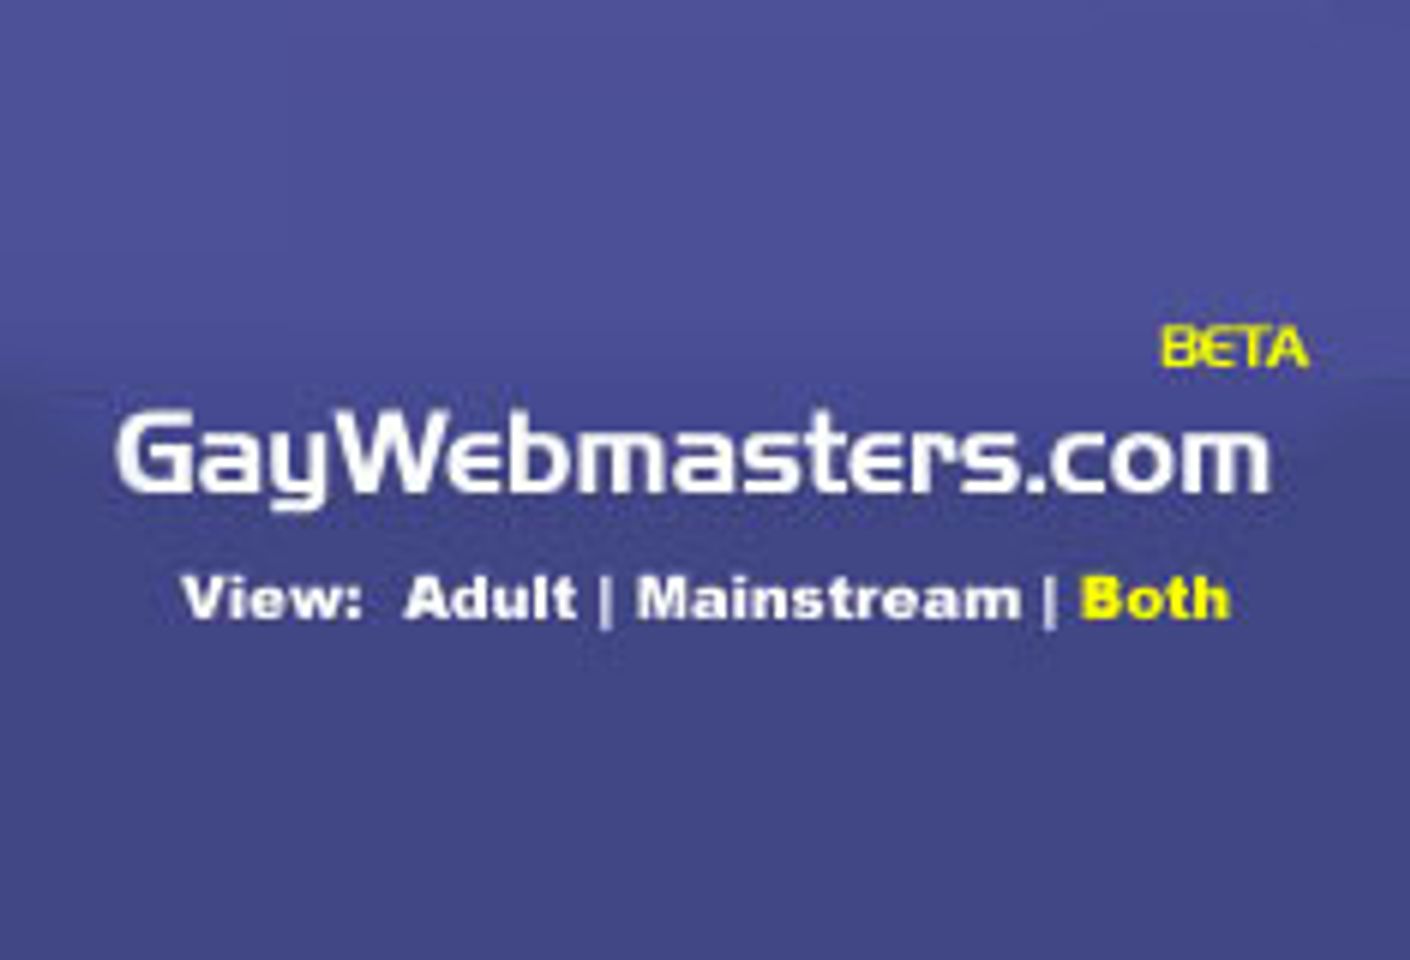 Last Chance to Register For GayWebmasters.com $1000 Giveaway